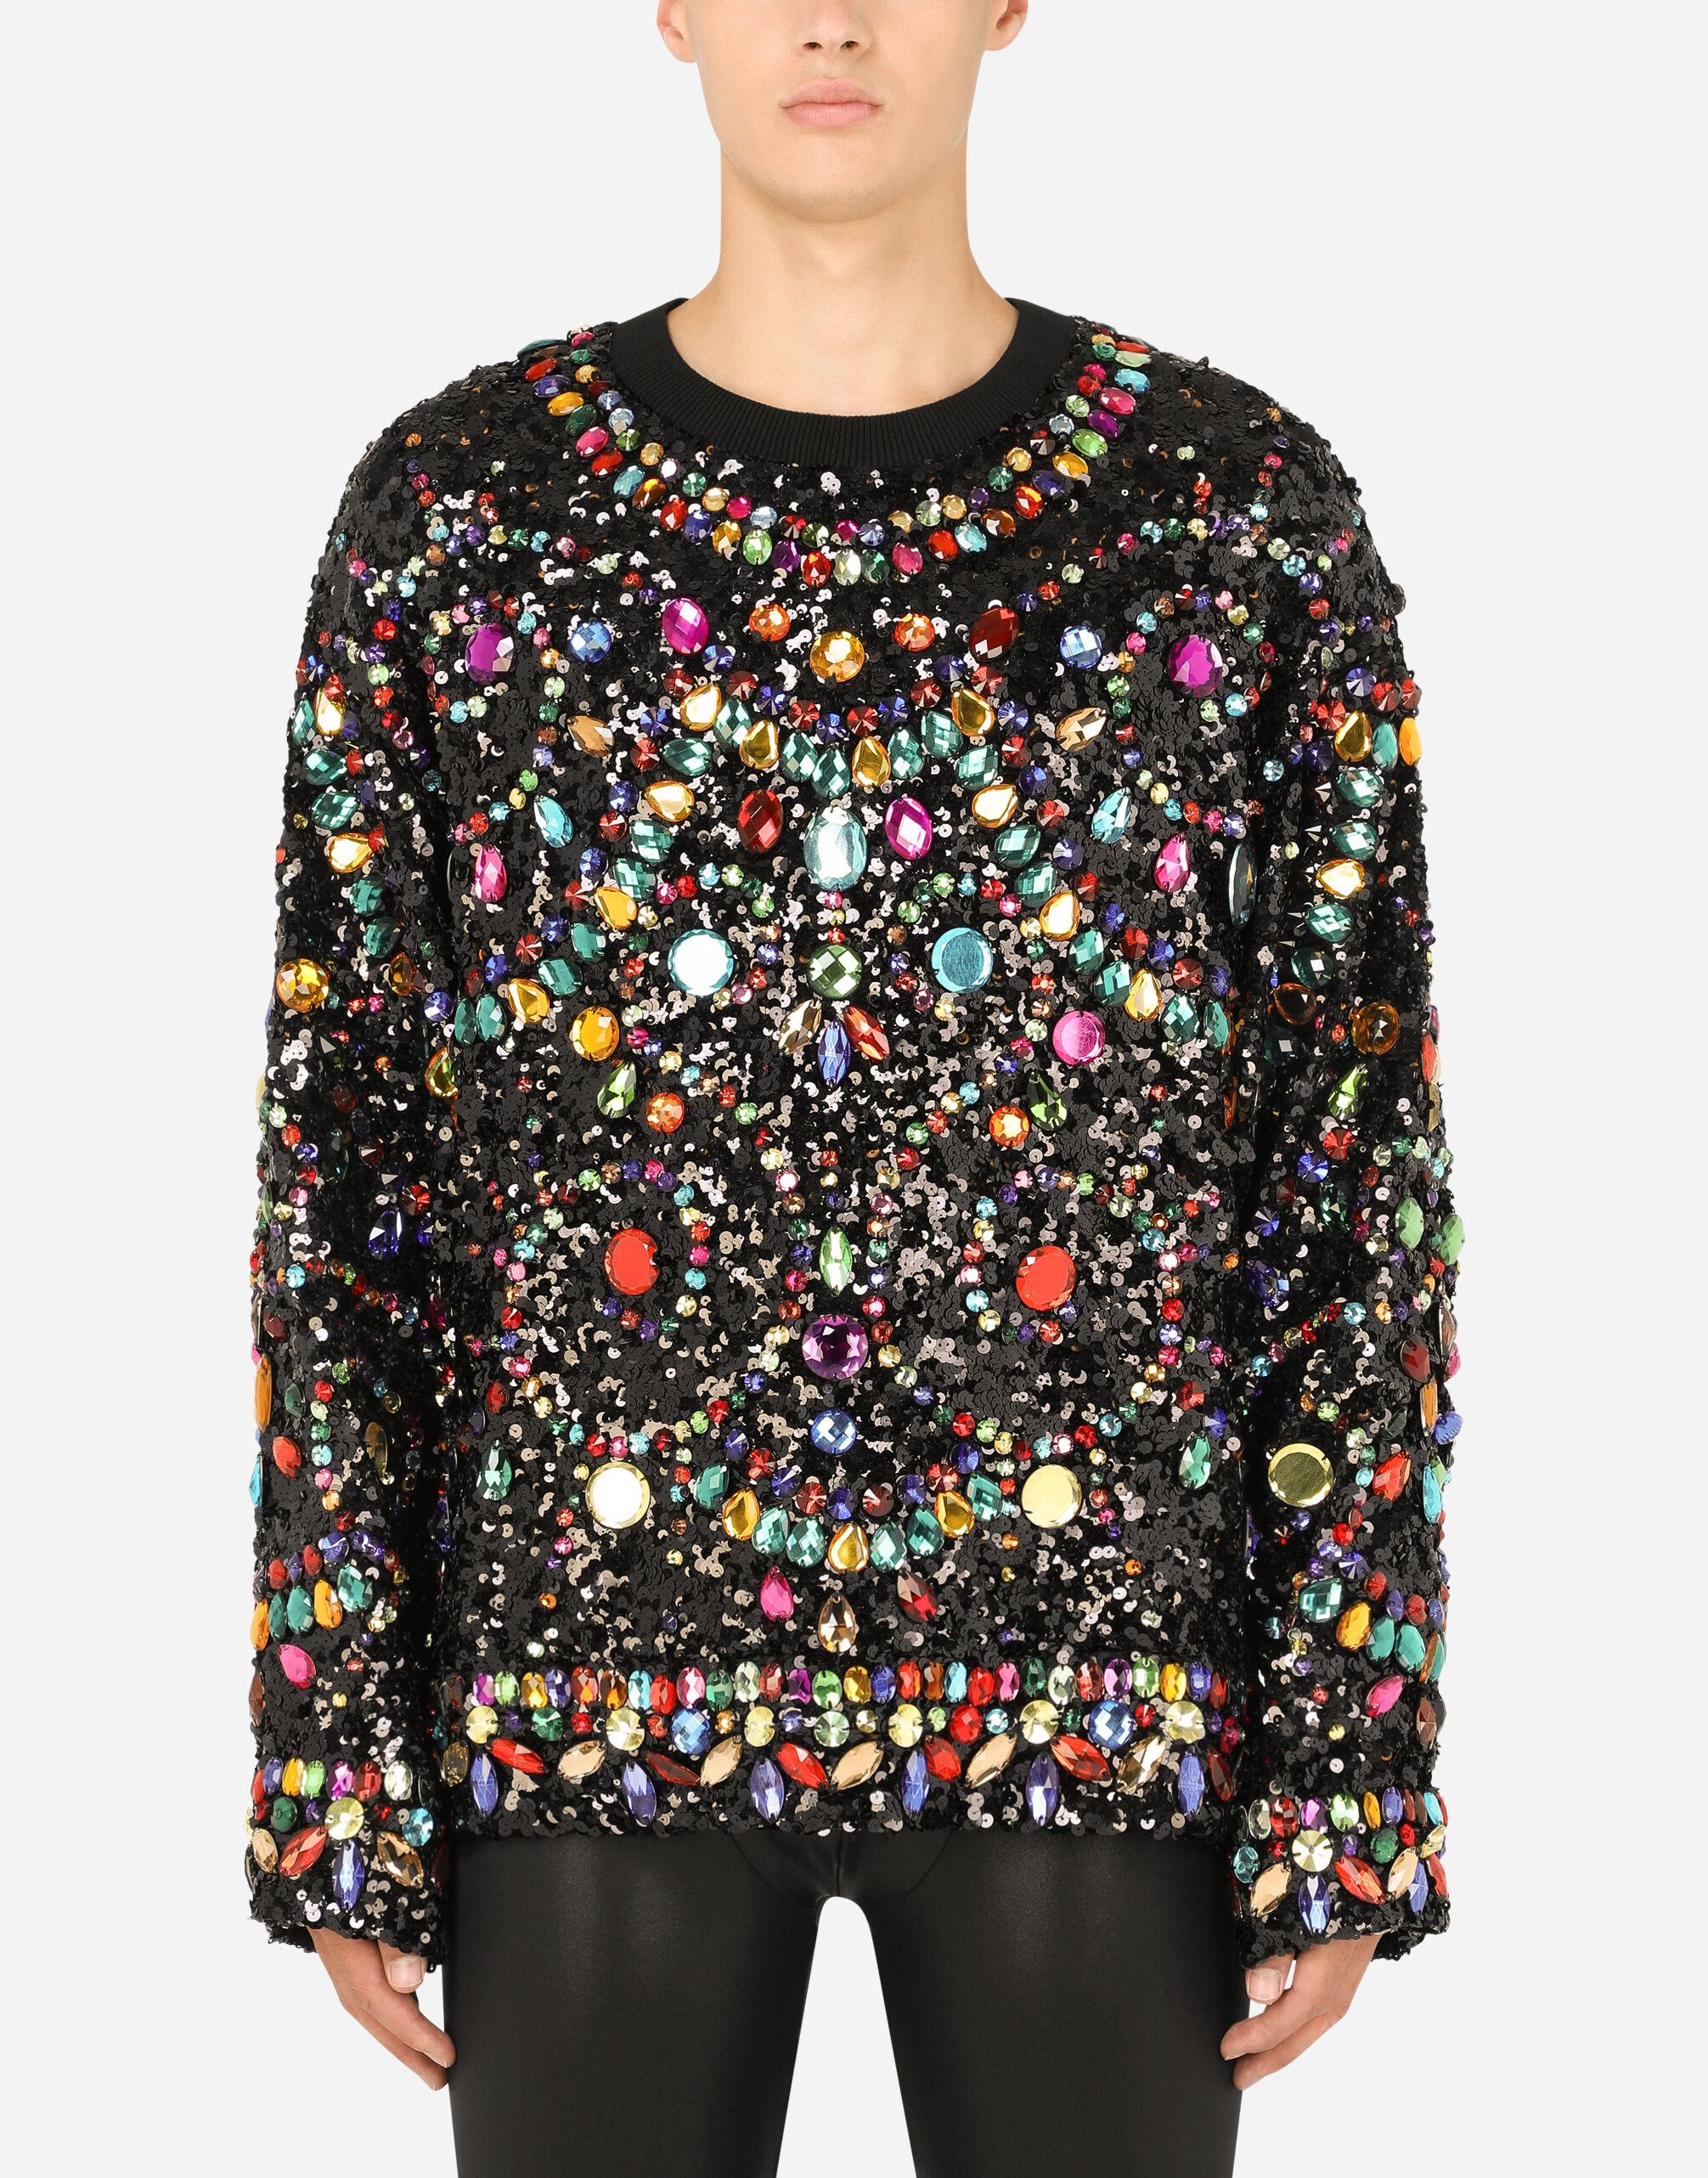 Dolce & Gabbana Multi-colored Sequined T-shirt With Crystals in